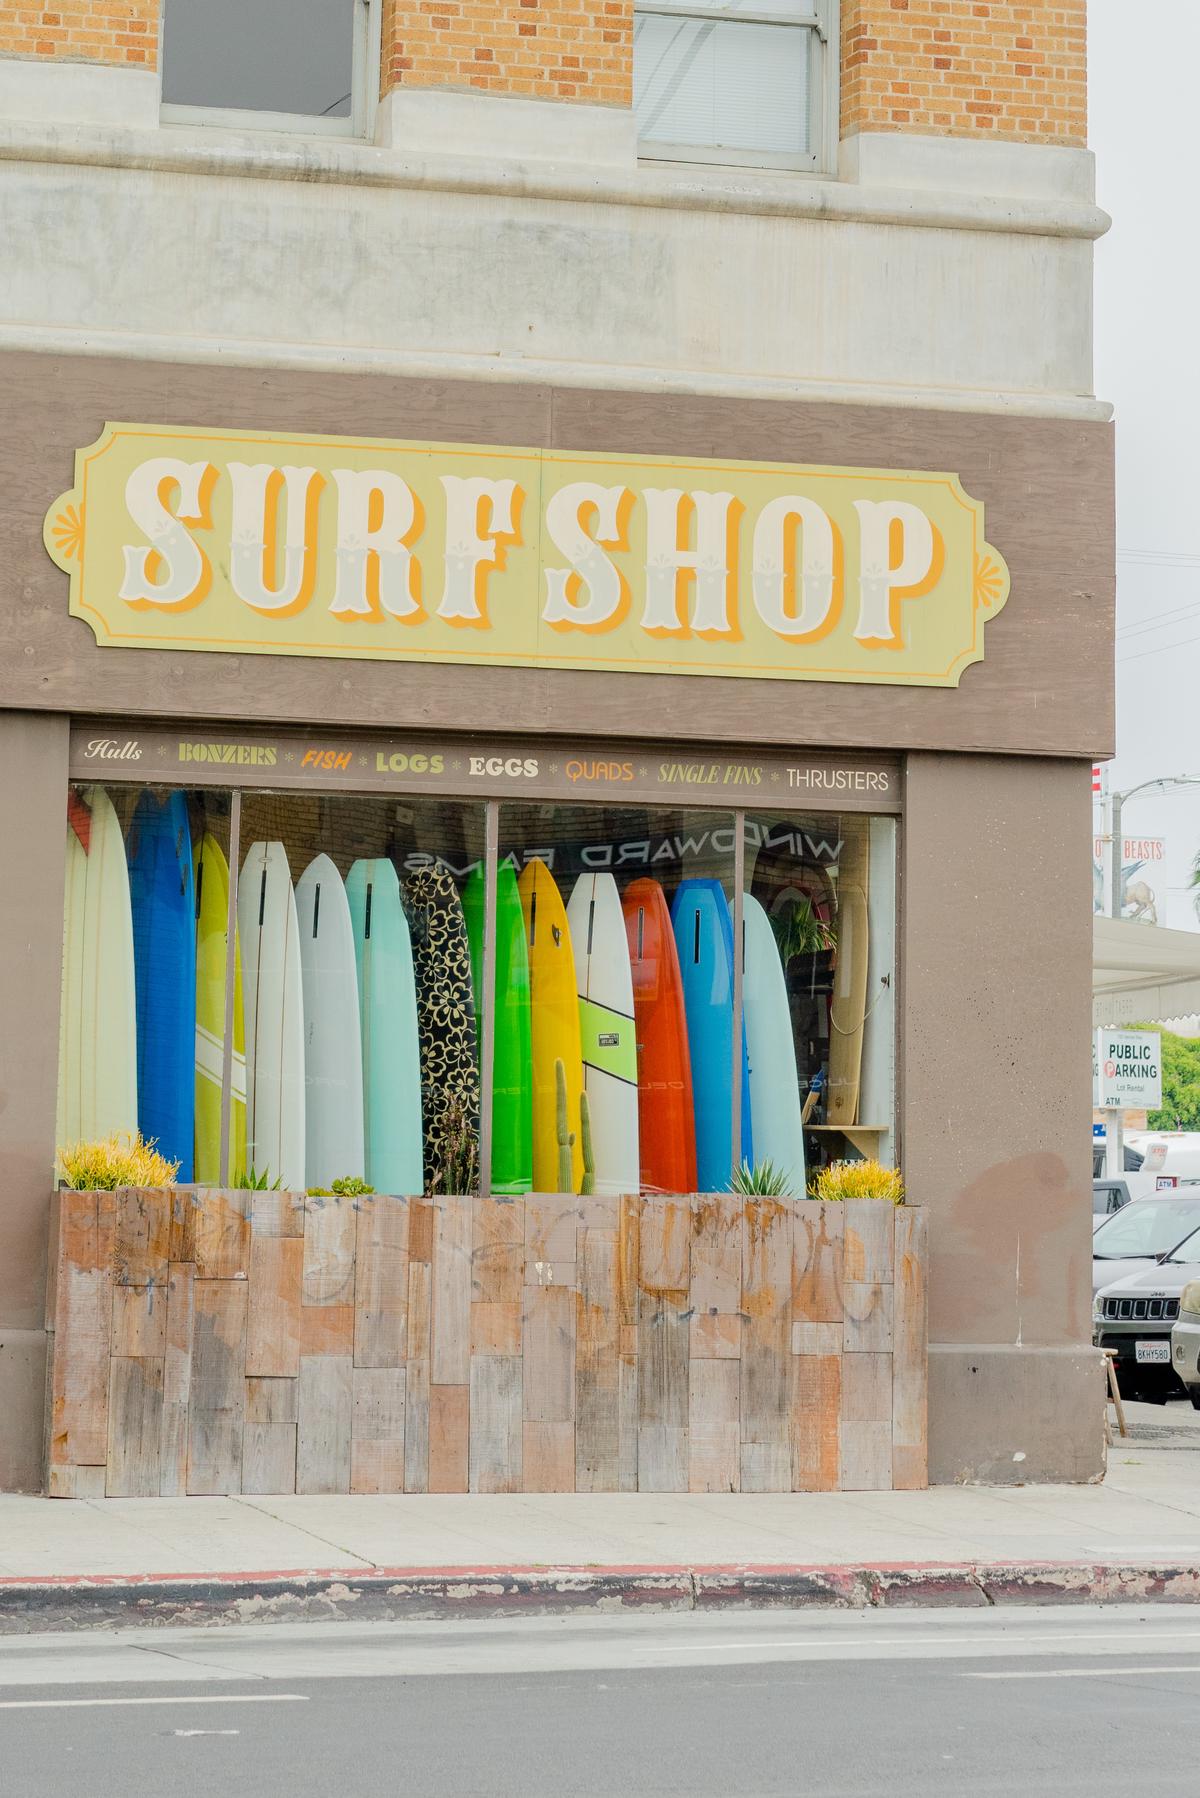 A picture of a Quiksilver surf shop with the logo in big letters above the entrance.